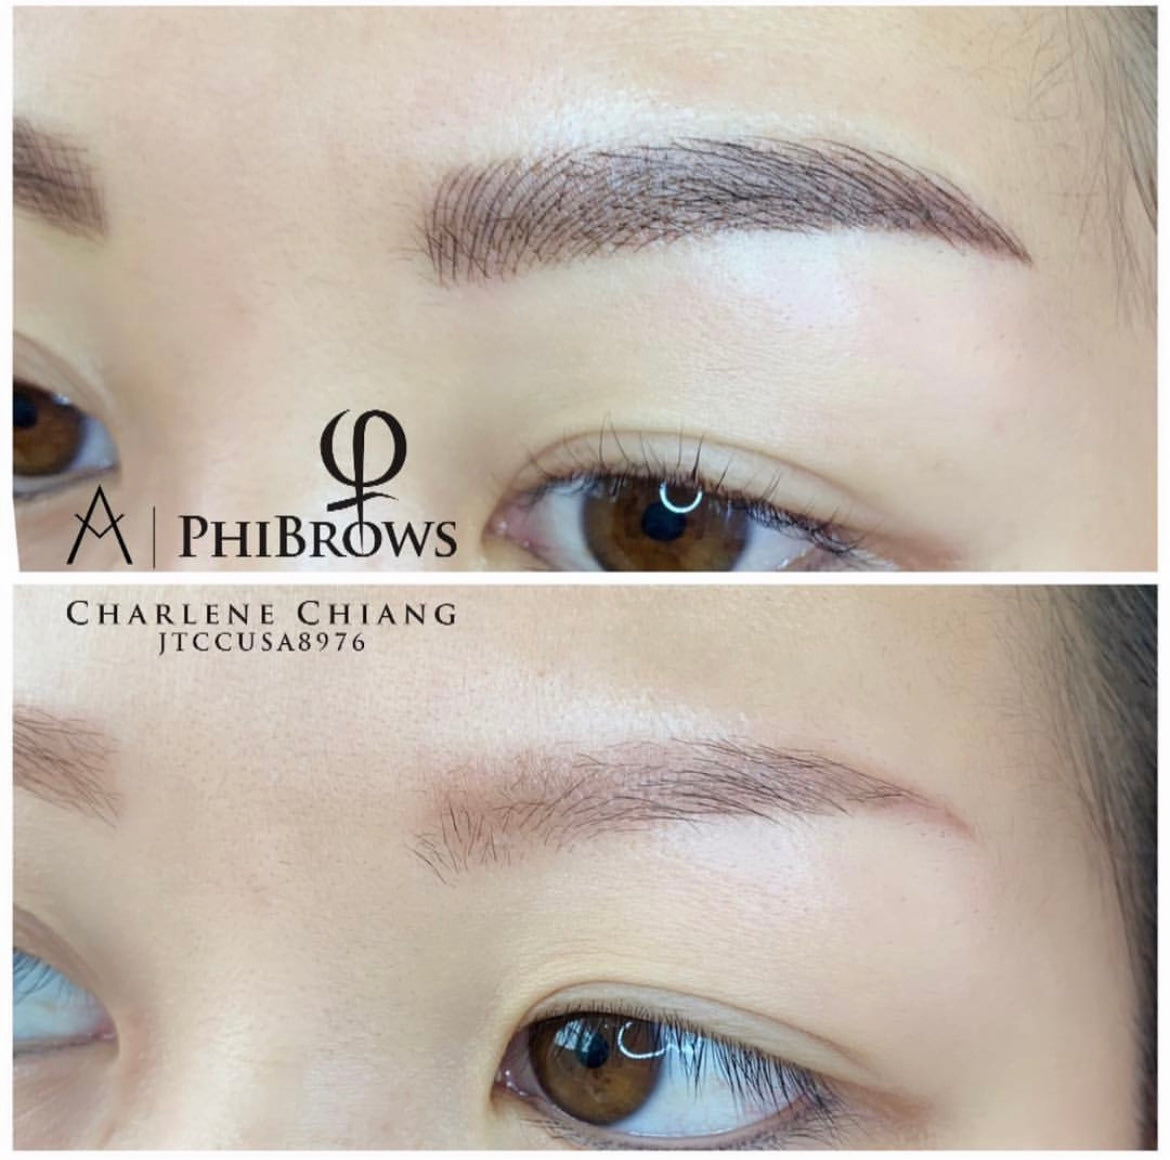 Microblading and Ombre Eyebrow